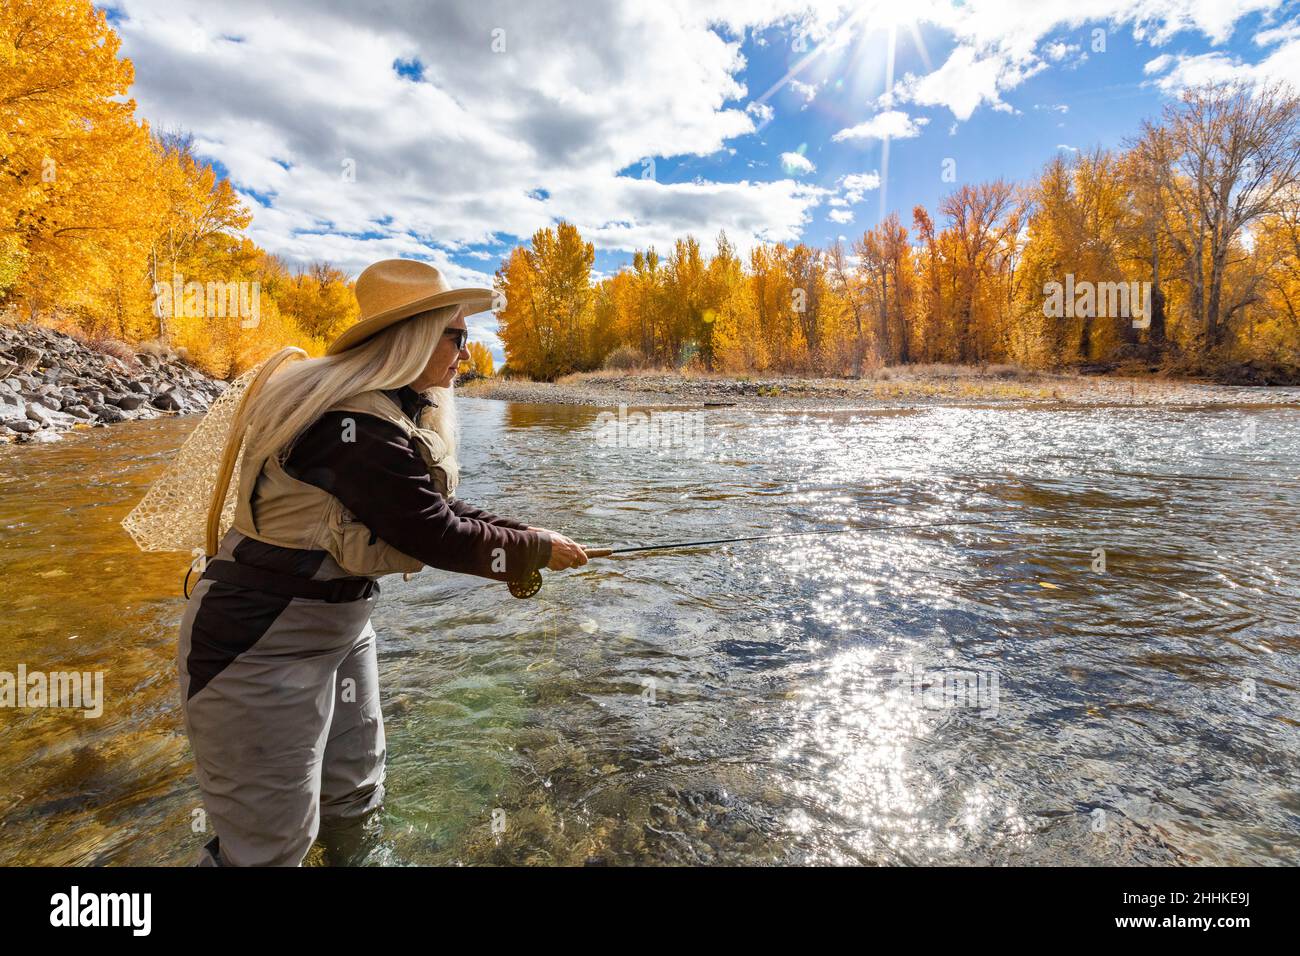 USA, Idaho, Bellevue, Senior woman fly-fishing in Big Wood River in autumn Stock Photo